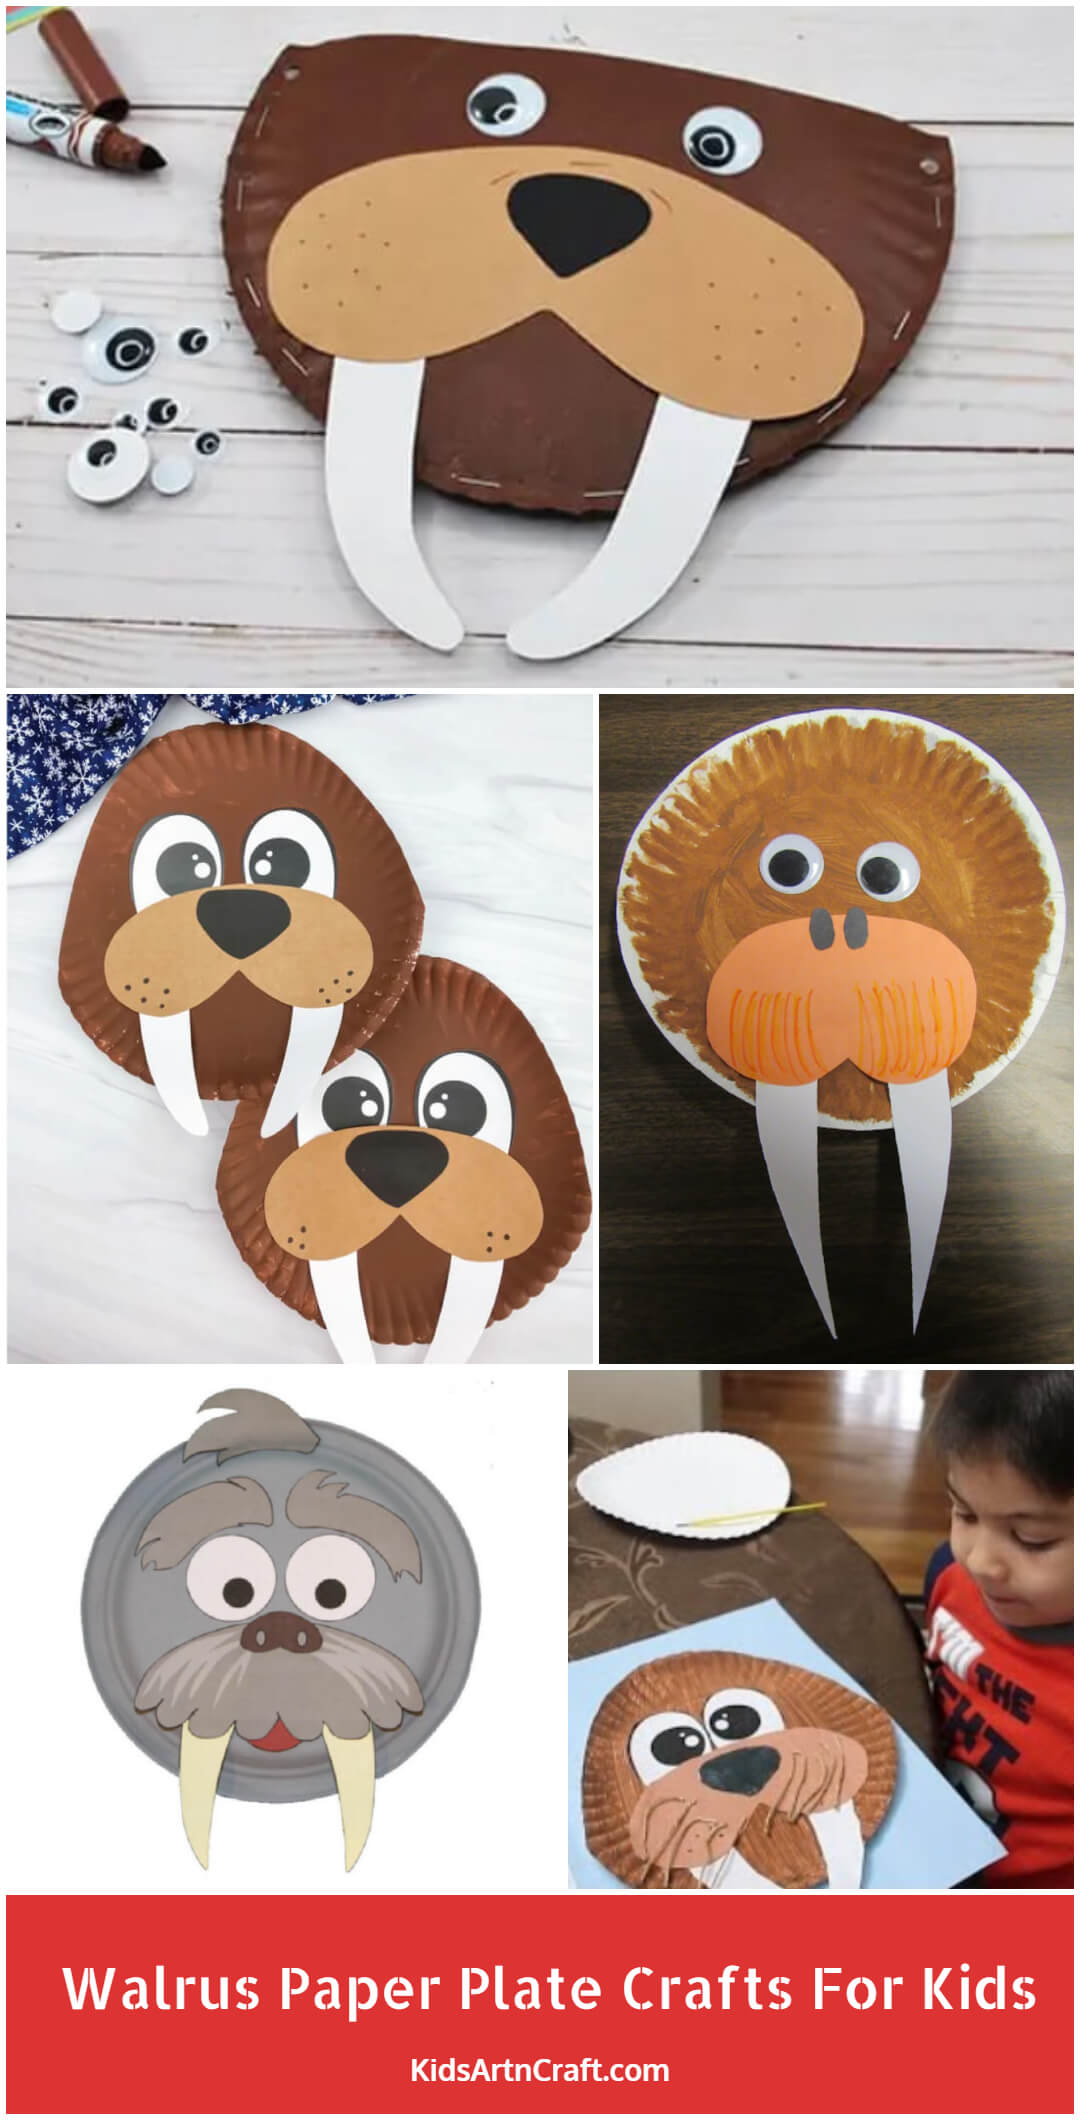 Walrus Paper Plate Crafts for Kids